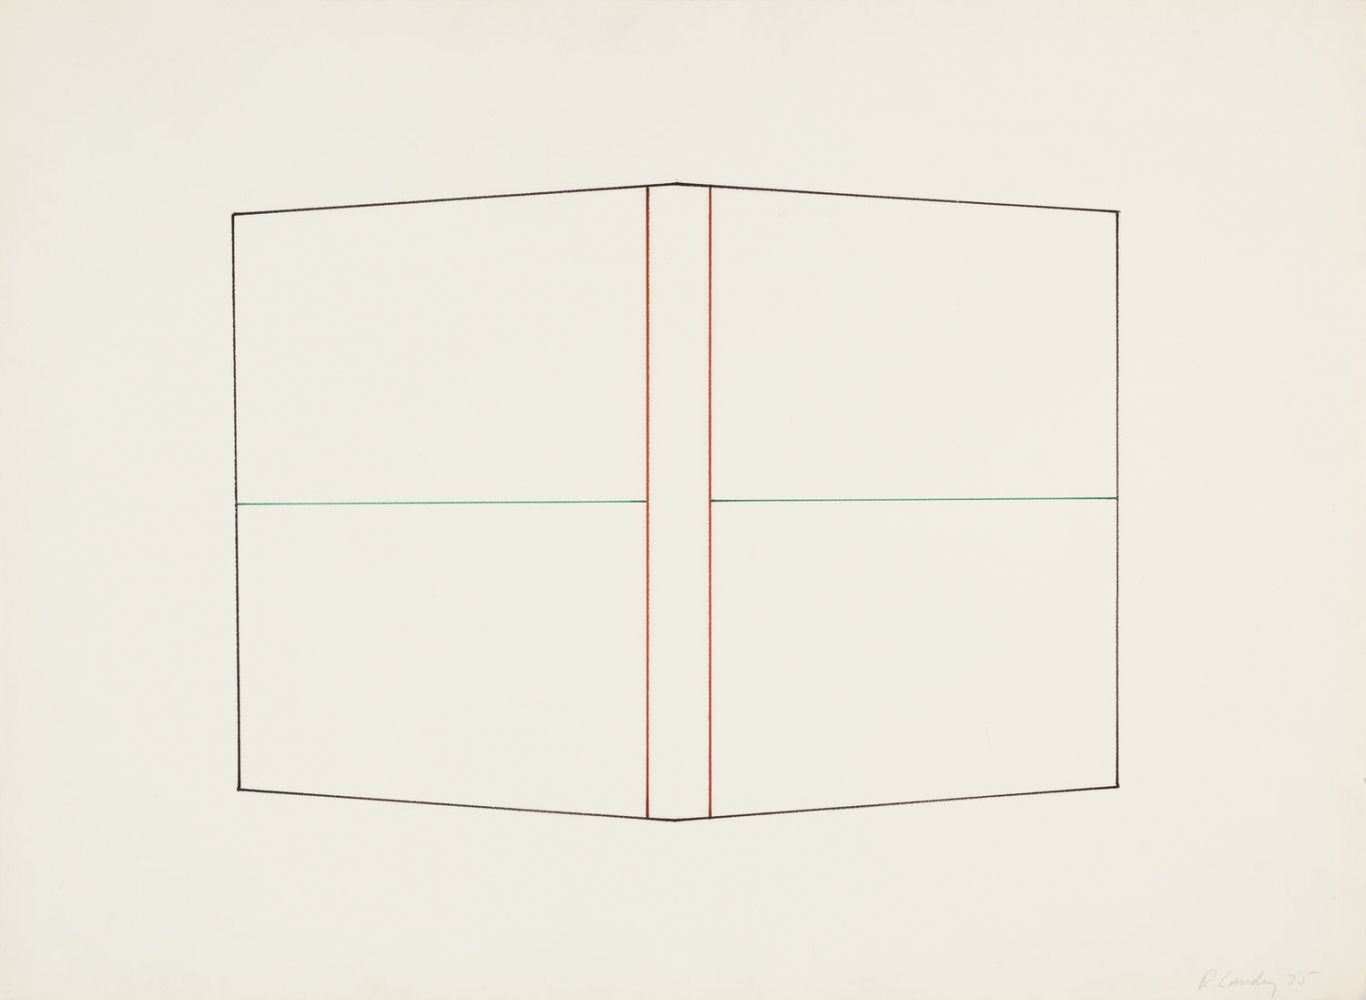 Dickie Landry
Line Drawing 3, 1975
Colored pencil on paper
24 x 32 inches